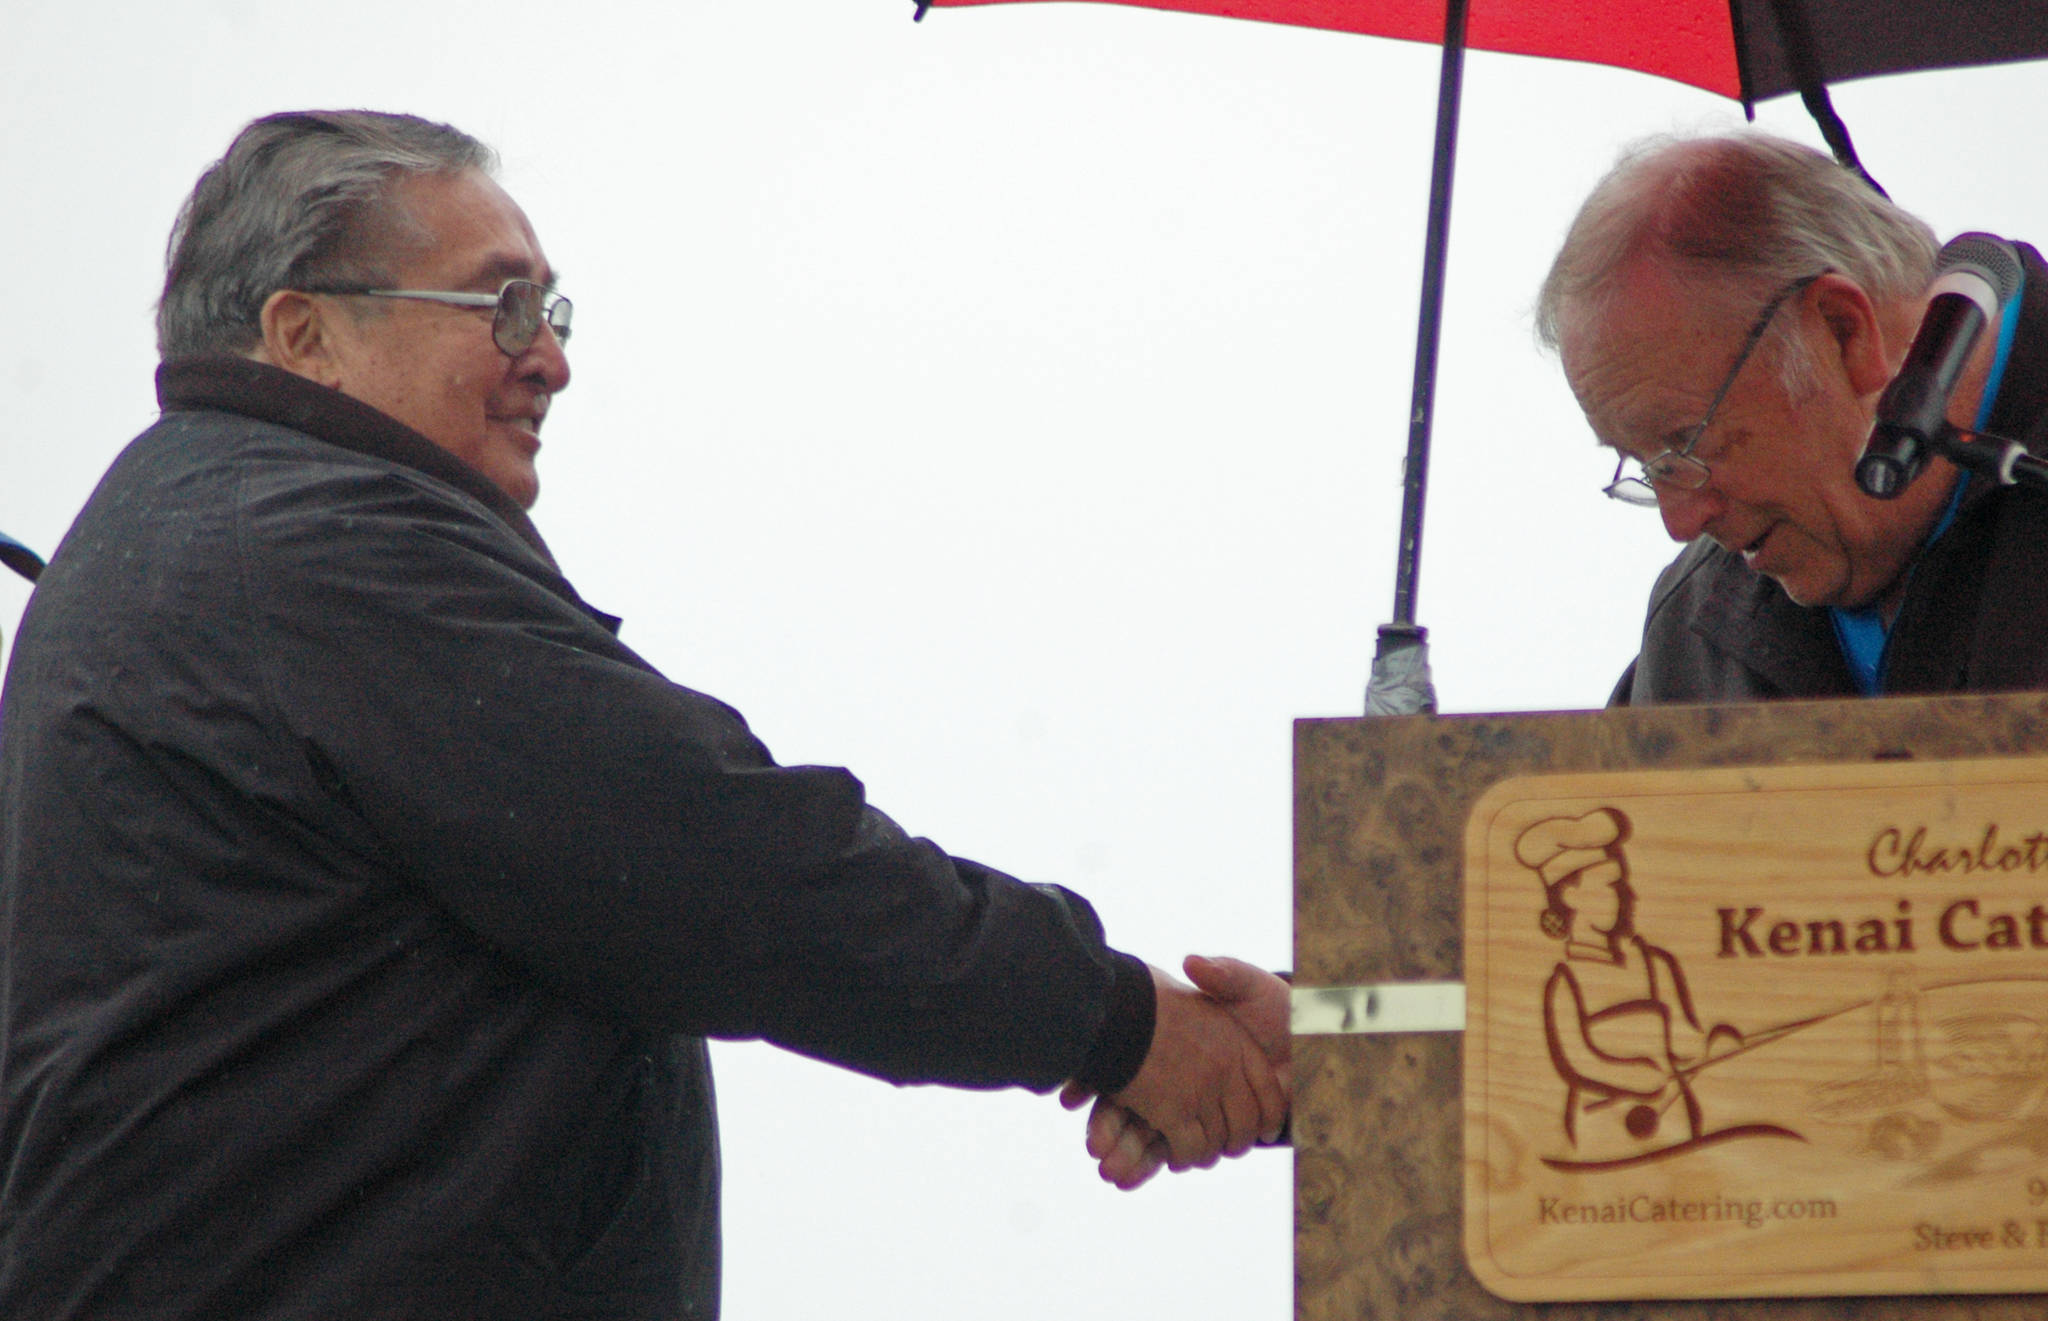 Rep. Mike Chenault, R-Nikiski (right) shakes hands with Kenai commercial fisherman Coby Wilson while presenting him and his wife Connie Wilson with an award at Industry Appreciation Day on Saturday, Aug. 25, 2018 in Kenai, Alaska. (Photo by Elizabeth Earl/Peninsula Clarion)